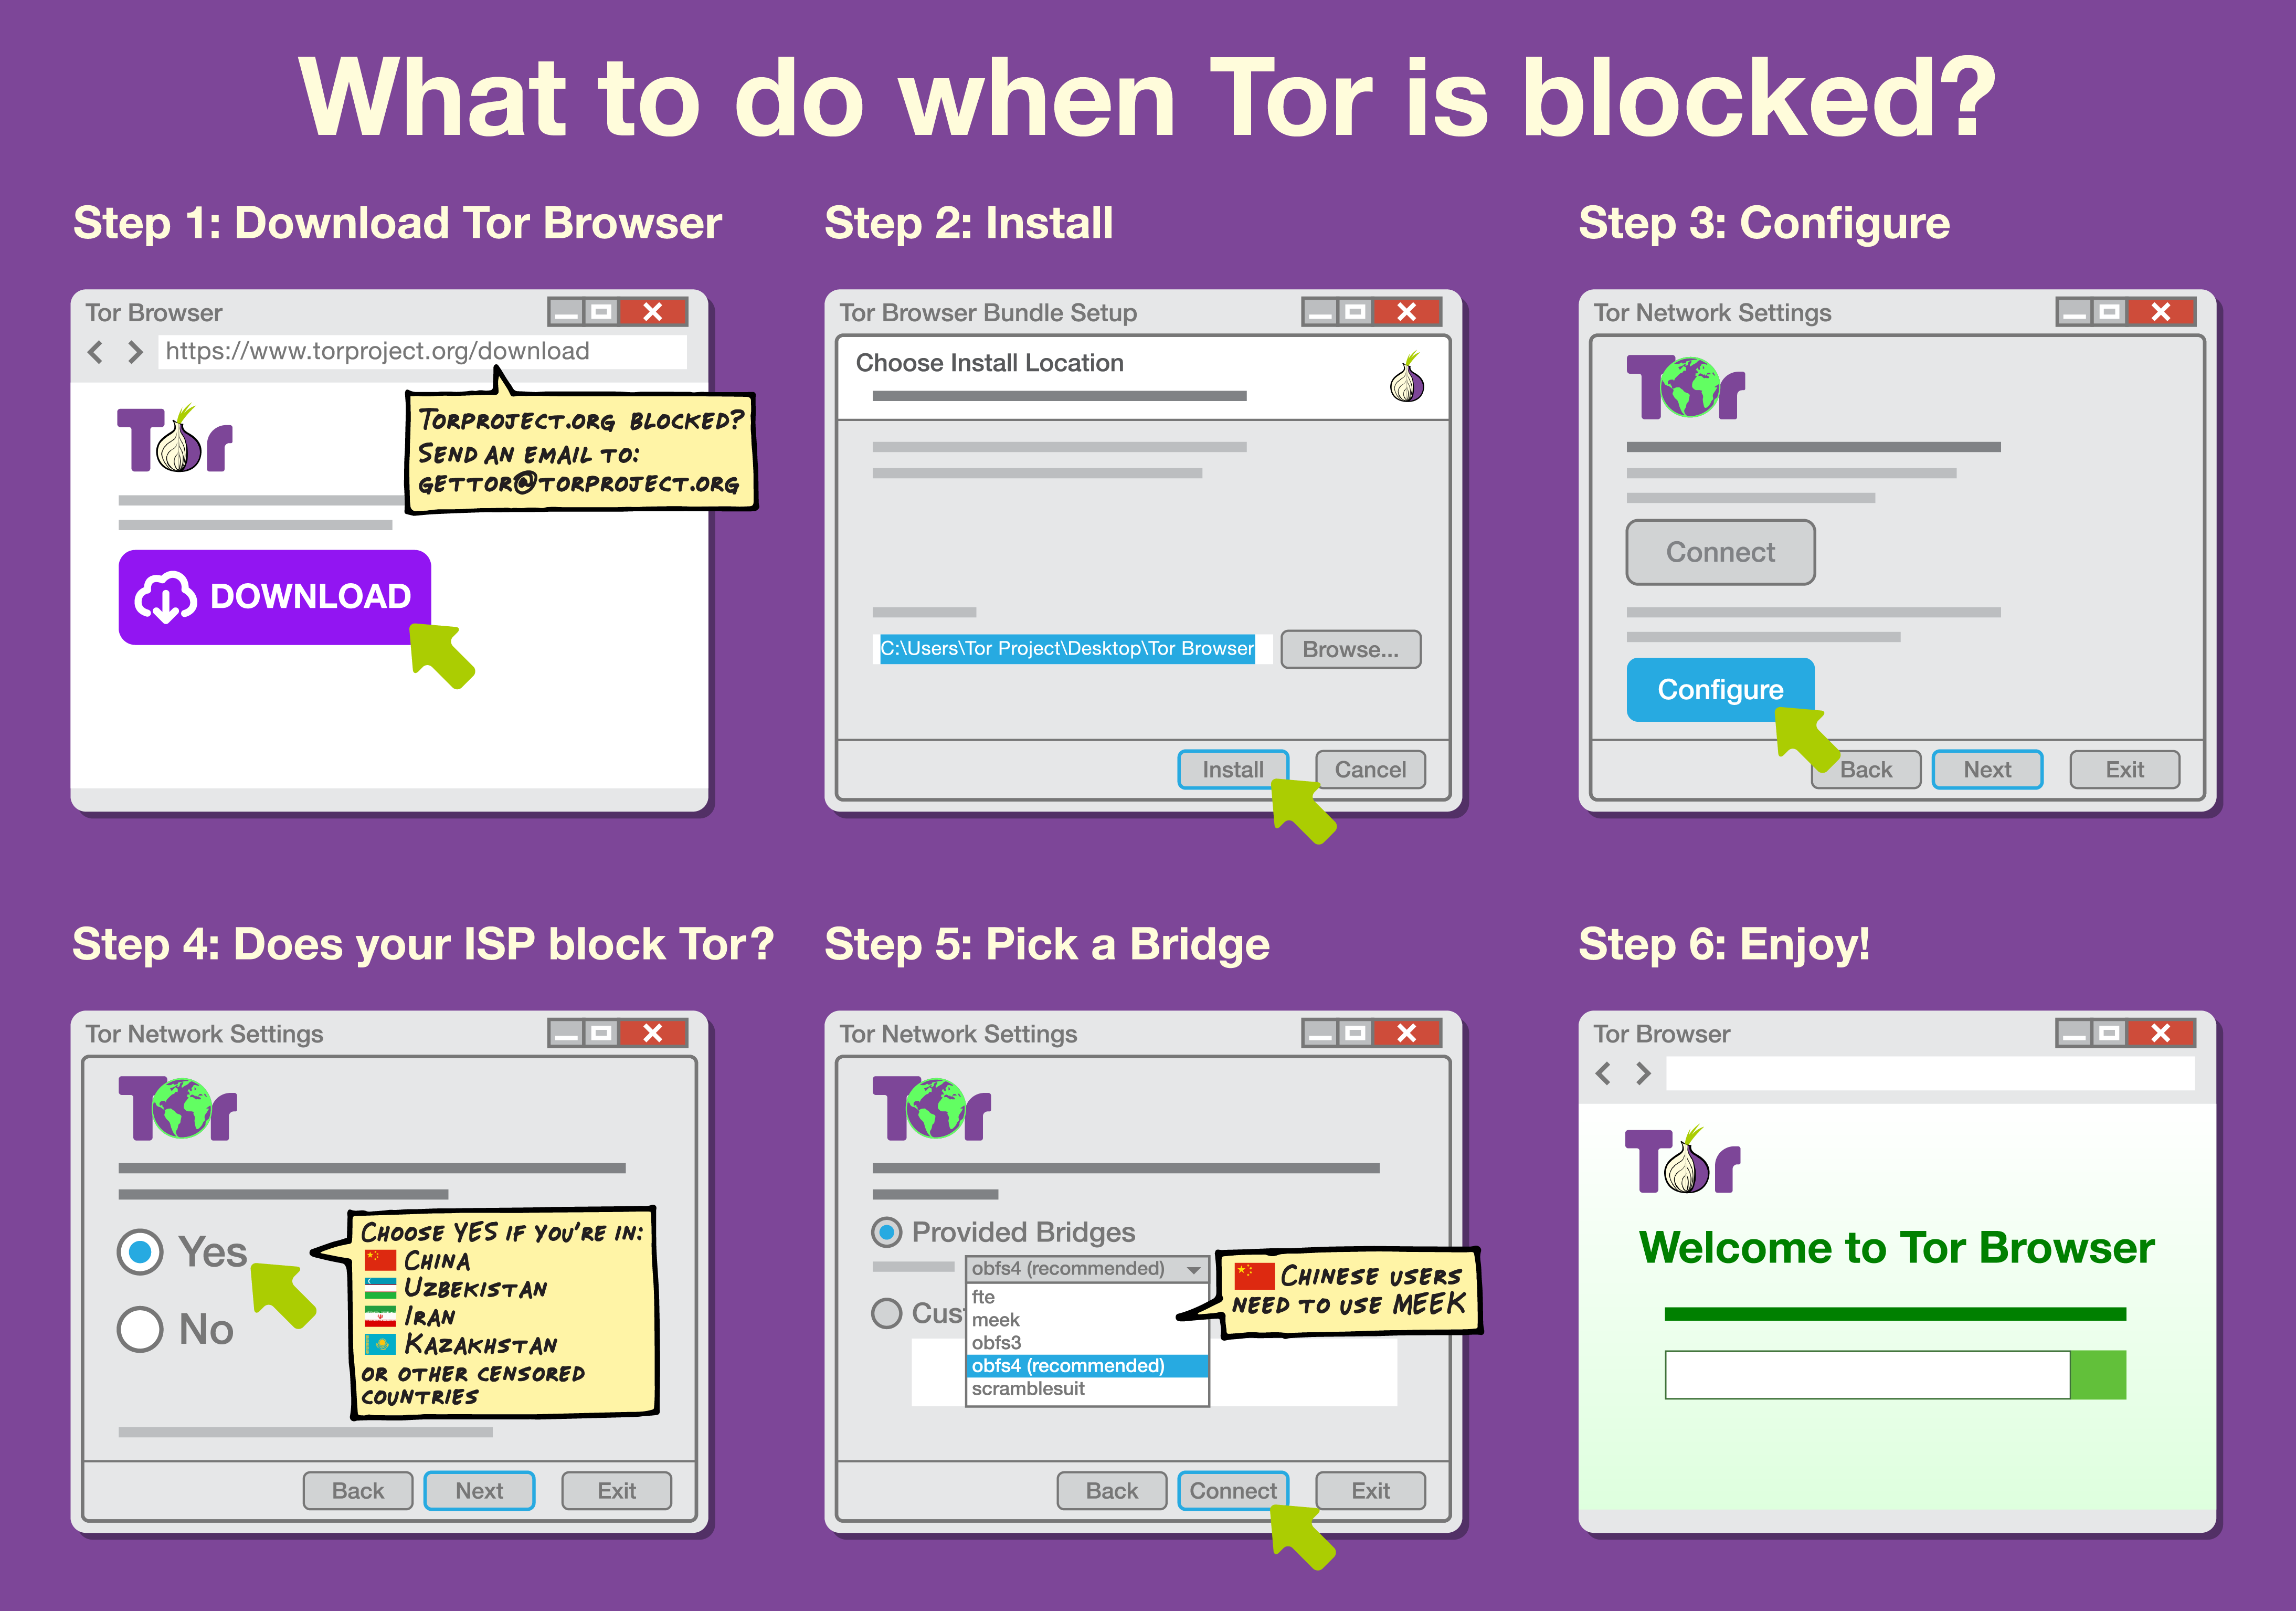 How to use PTs: 1-download tor-send email to gettor@torproject.org; 2 select configure 3; check my isp blocks tor option; 4 select obfs4; 5 press connect